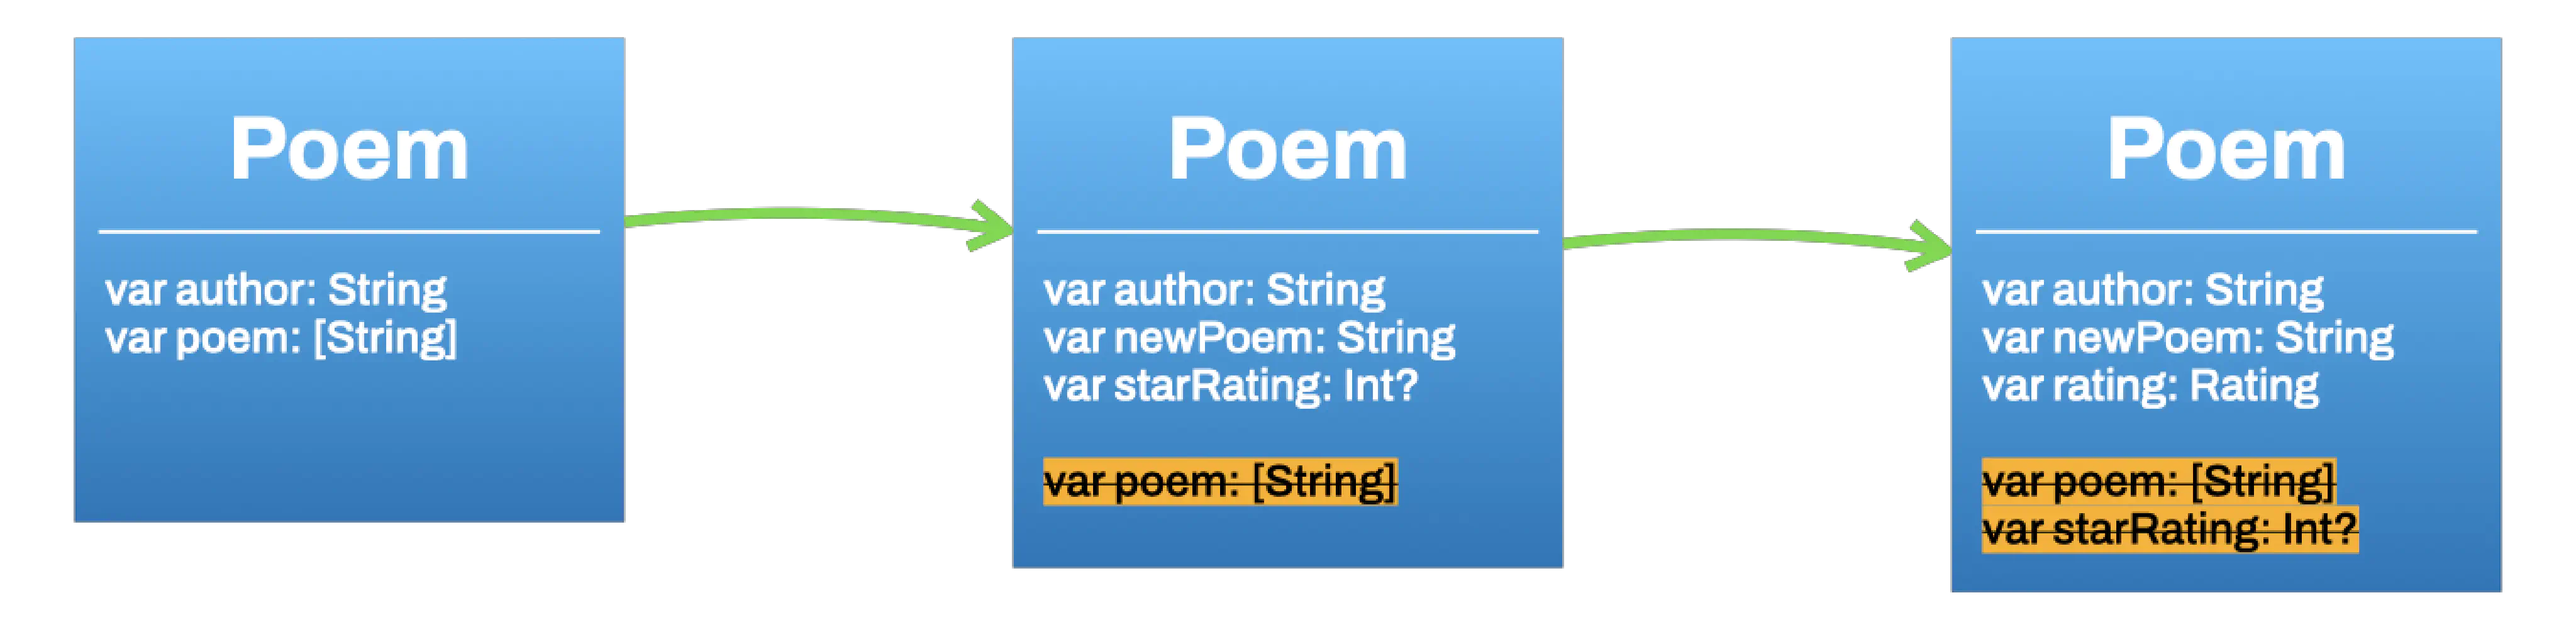 Three versions of the Poem type next to each other. Each one has some new field added and an old one deprecated. From the first to the second, there's a new field called poemString which is a String, and poem (an array of Strings) has been deprecated. From the second to the third, a new field called rating appears, replacing the previous starRating optional integer which is now deprecated.